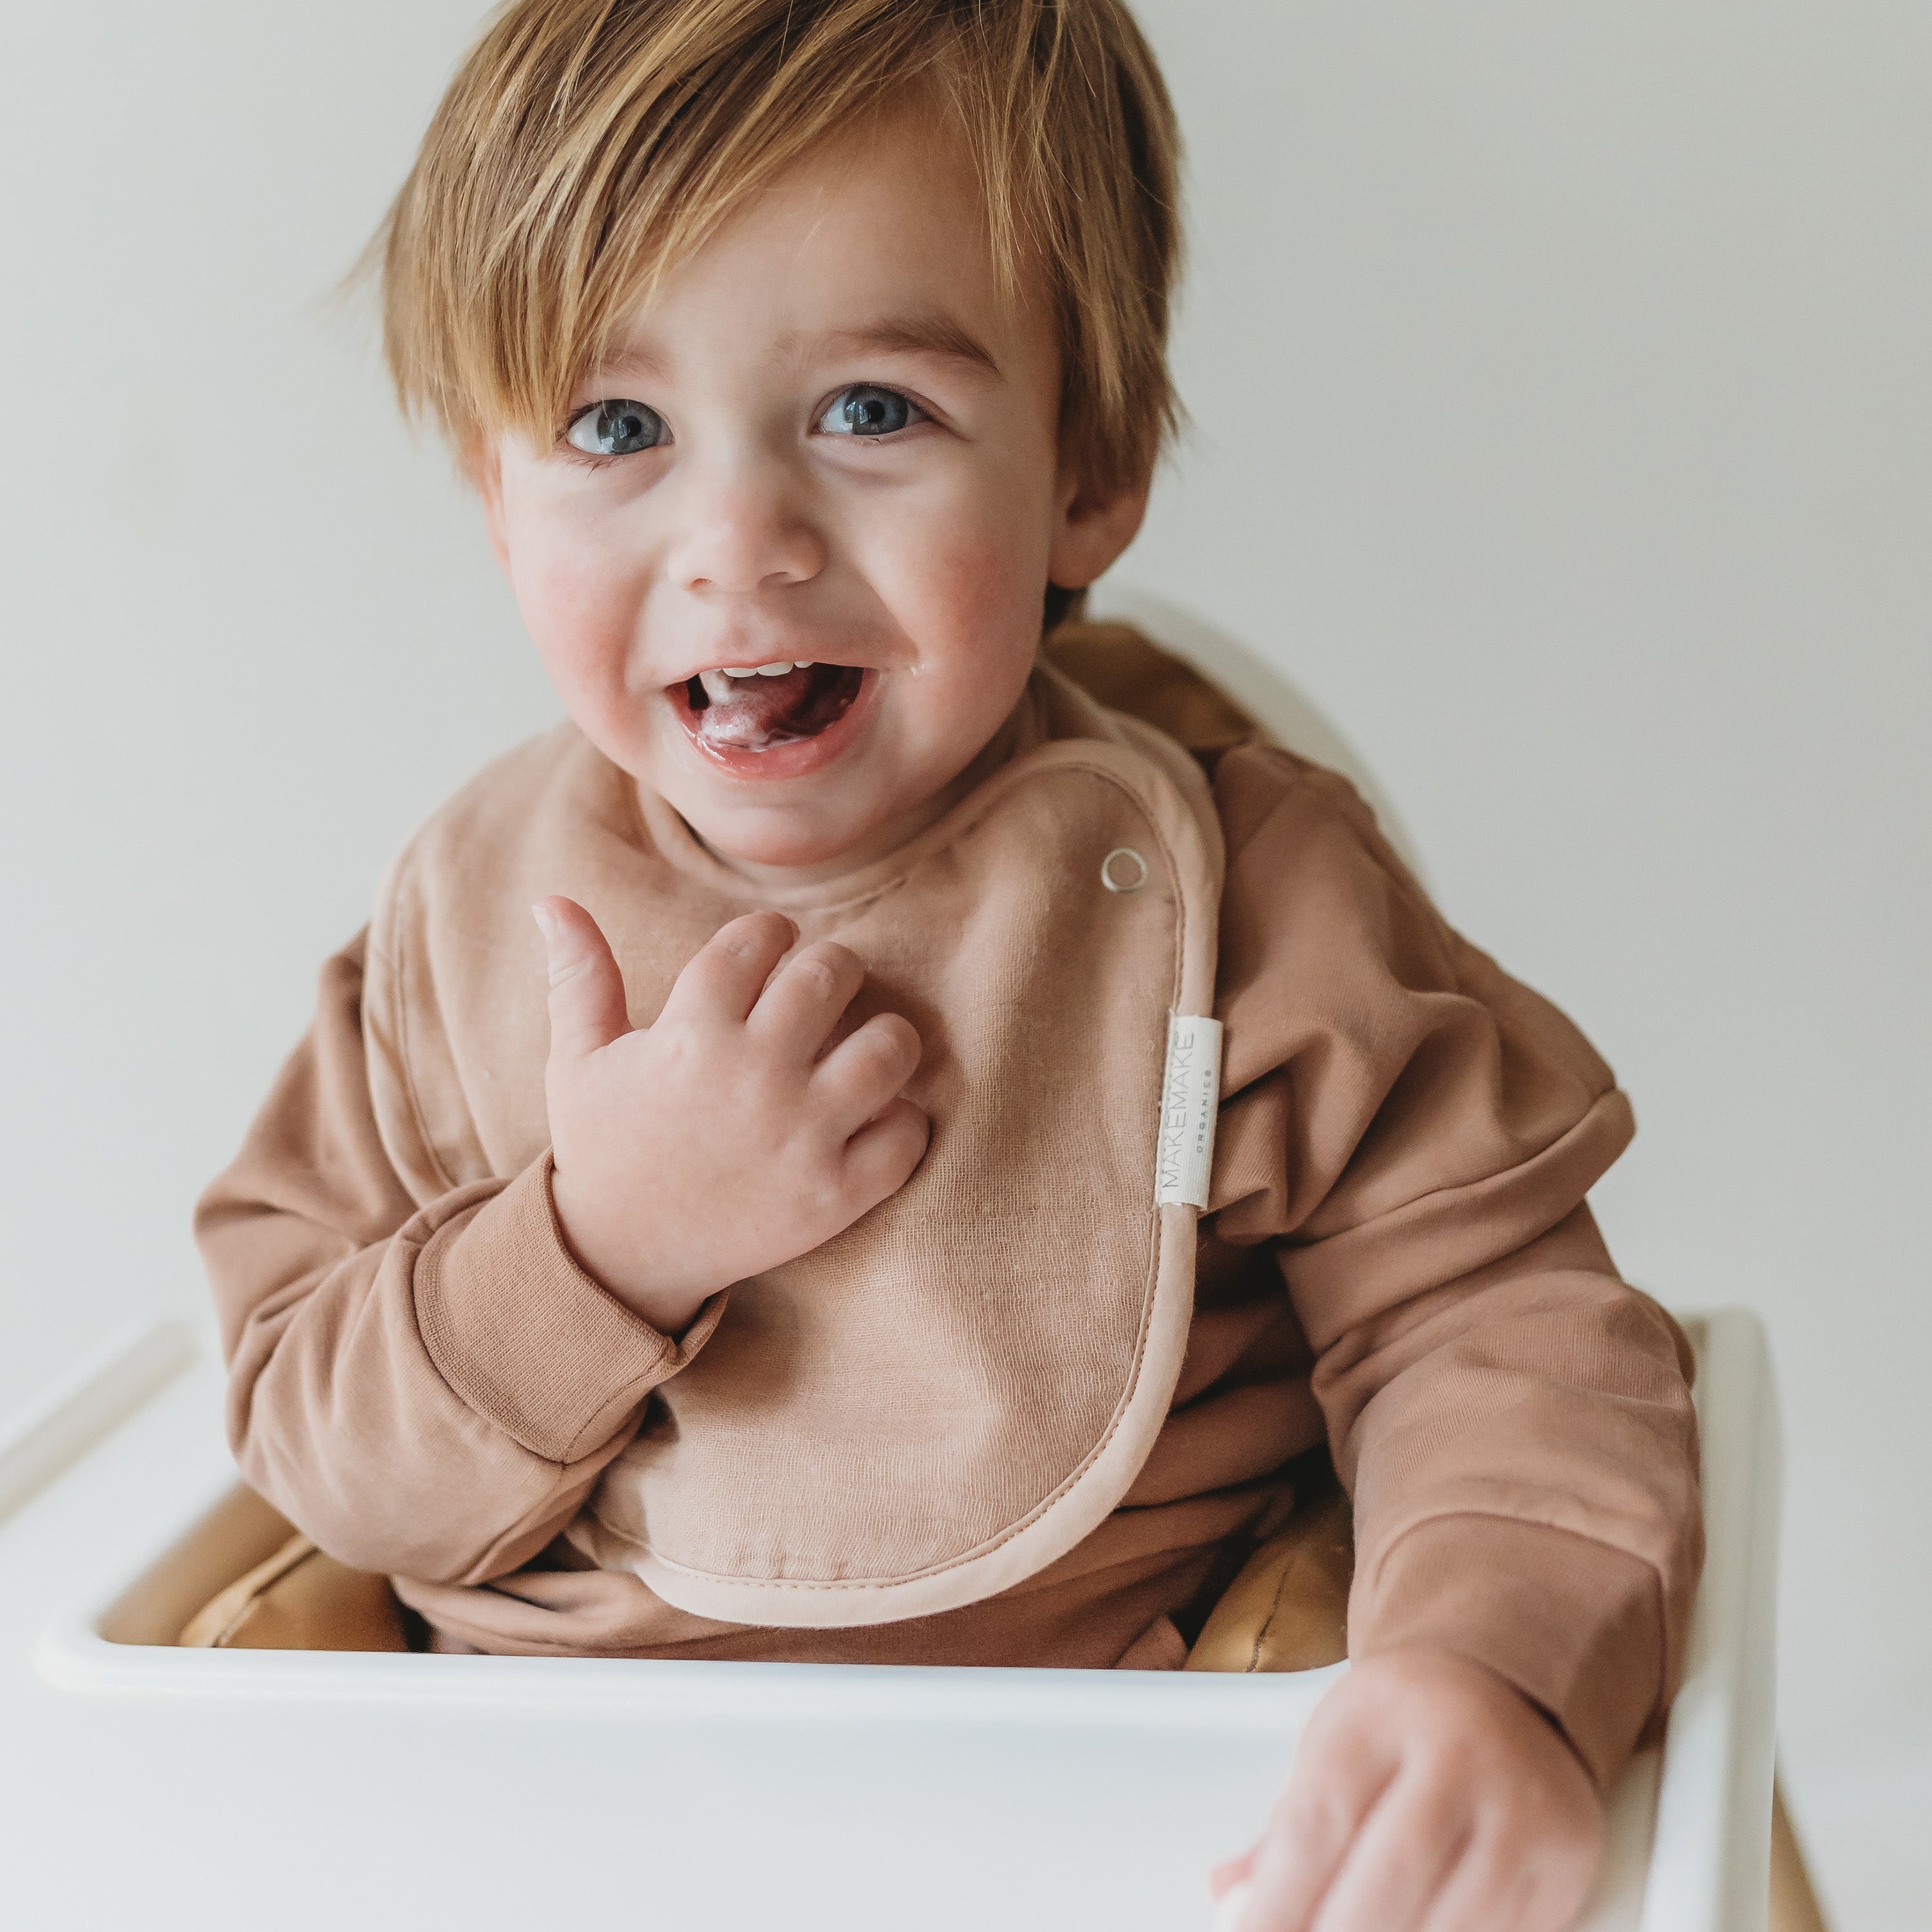 A cheerful toddler with tousled hair sitting in a white high chair, dressed in a brown long-sleeve shirt and Makemake Organics Organic Muslin Bibs - Blush Oat & Pecan, pointing at their chest with a joyful expression.